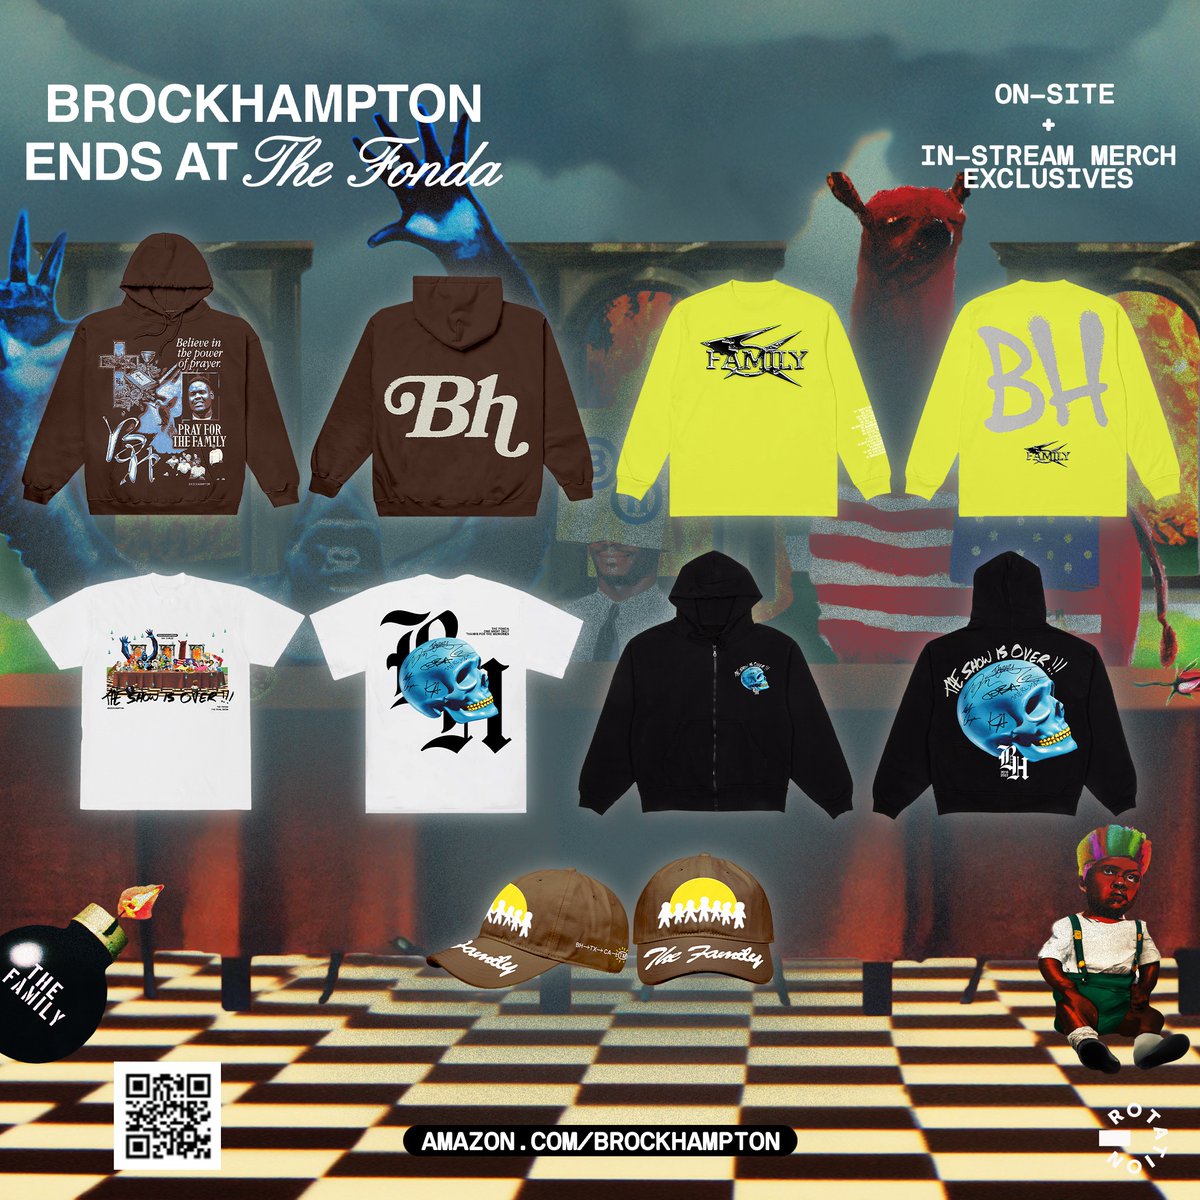 FONDA SHOW MERCH EXCLUSIVES AVAILABLE ON-SITE TONIGHT AND ONLINE FOR 48 HOURS ONLY amazon.com/brockhampton